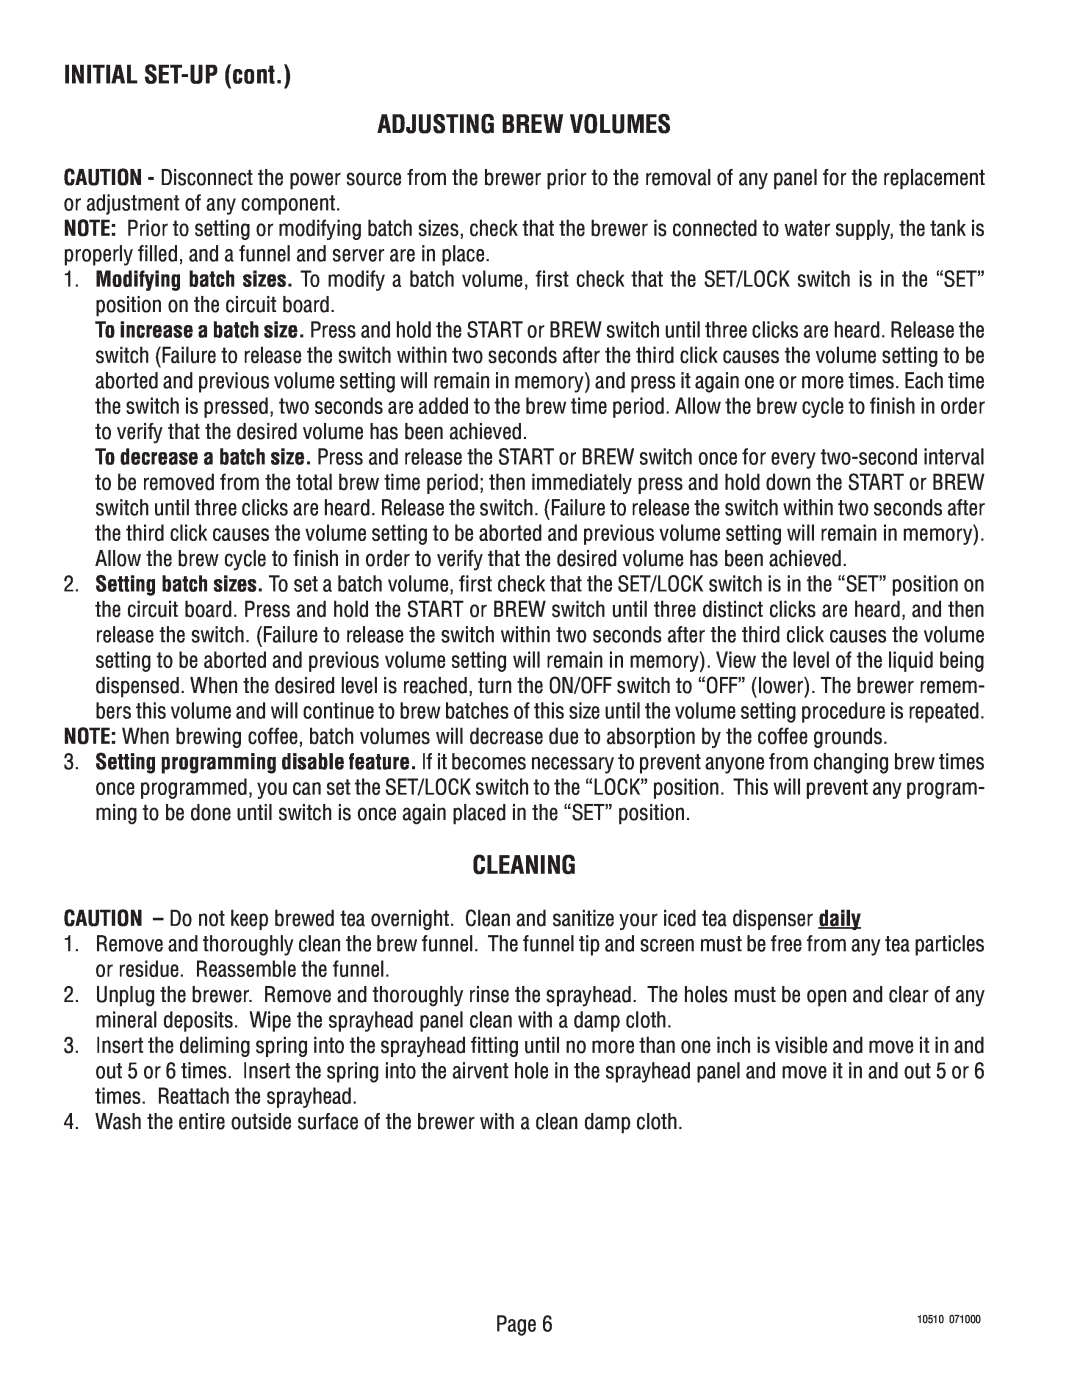 Bunn TWF service manual INITIAL SET-UPcont ADJUSTING BREW VOLUMES, Cleaning 